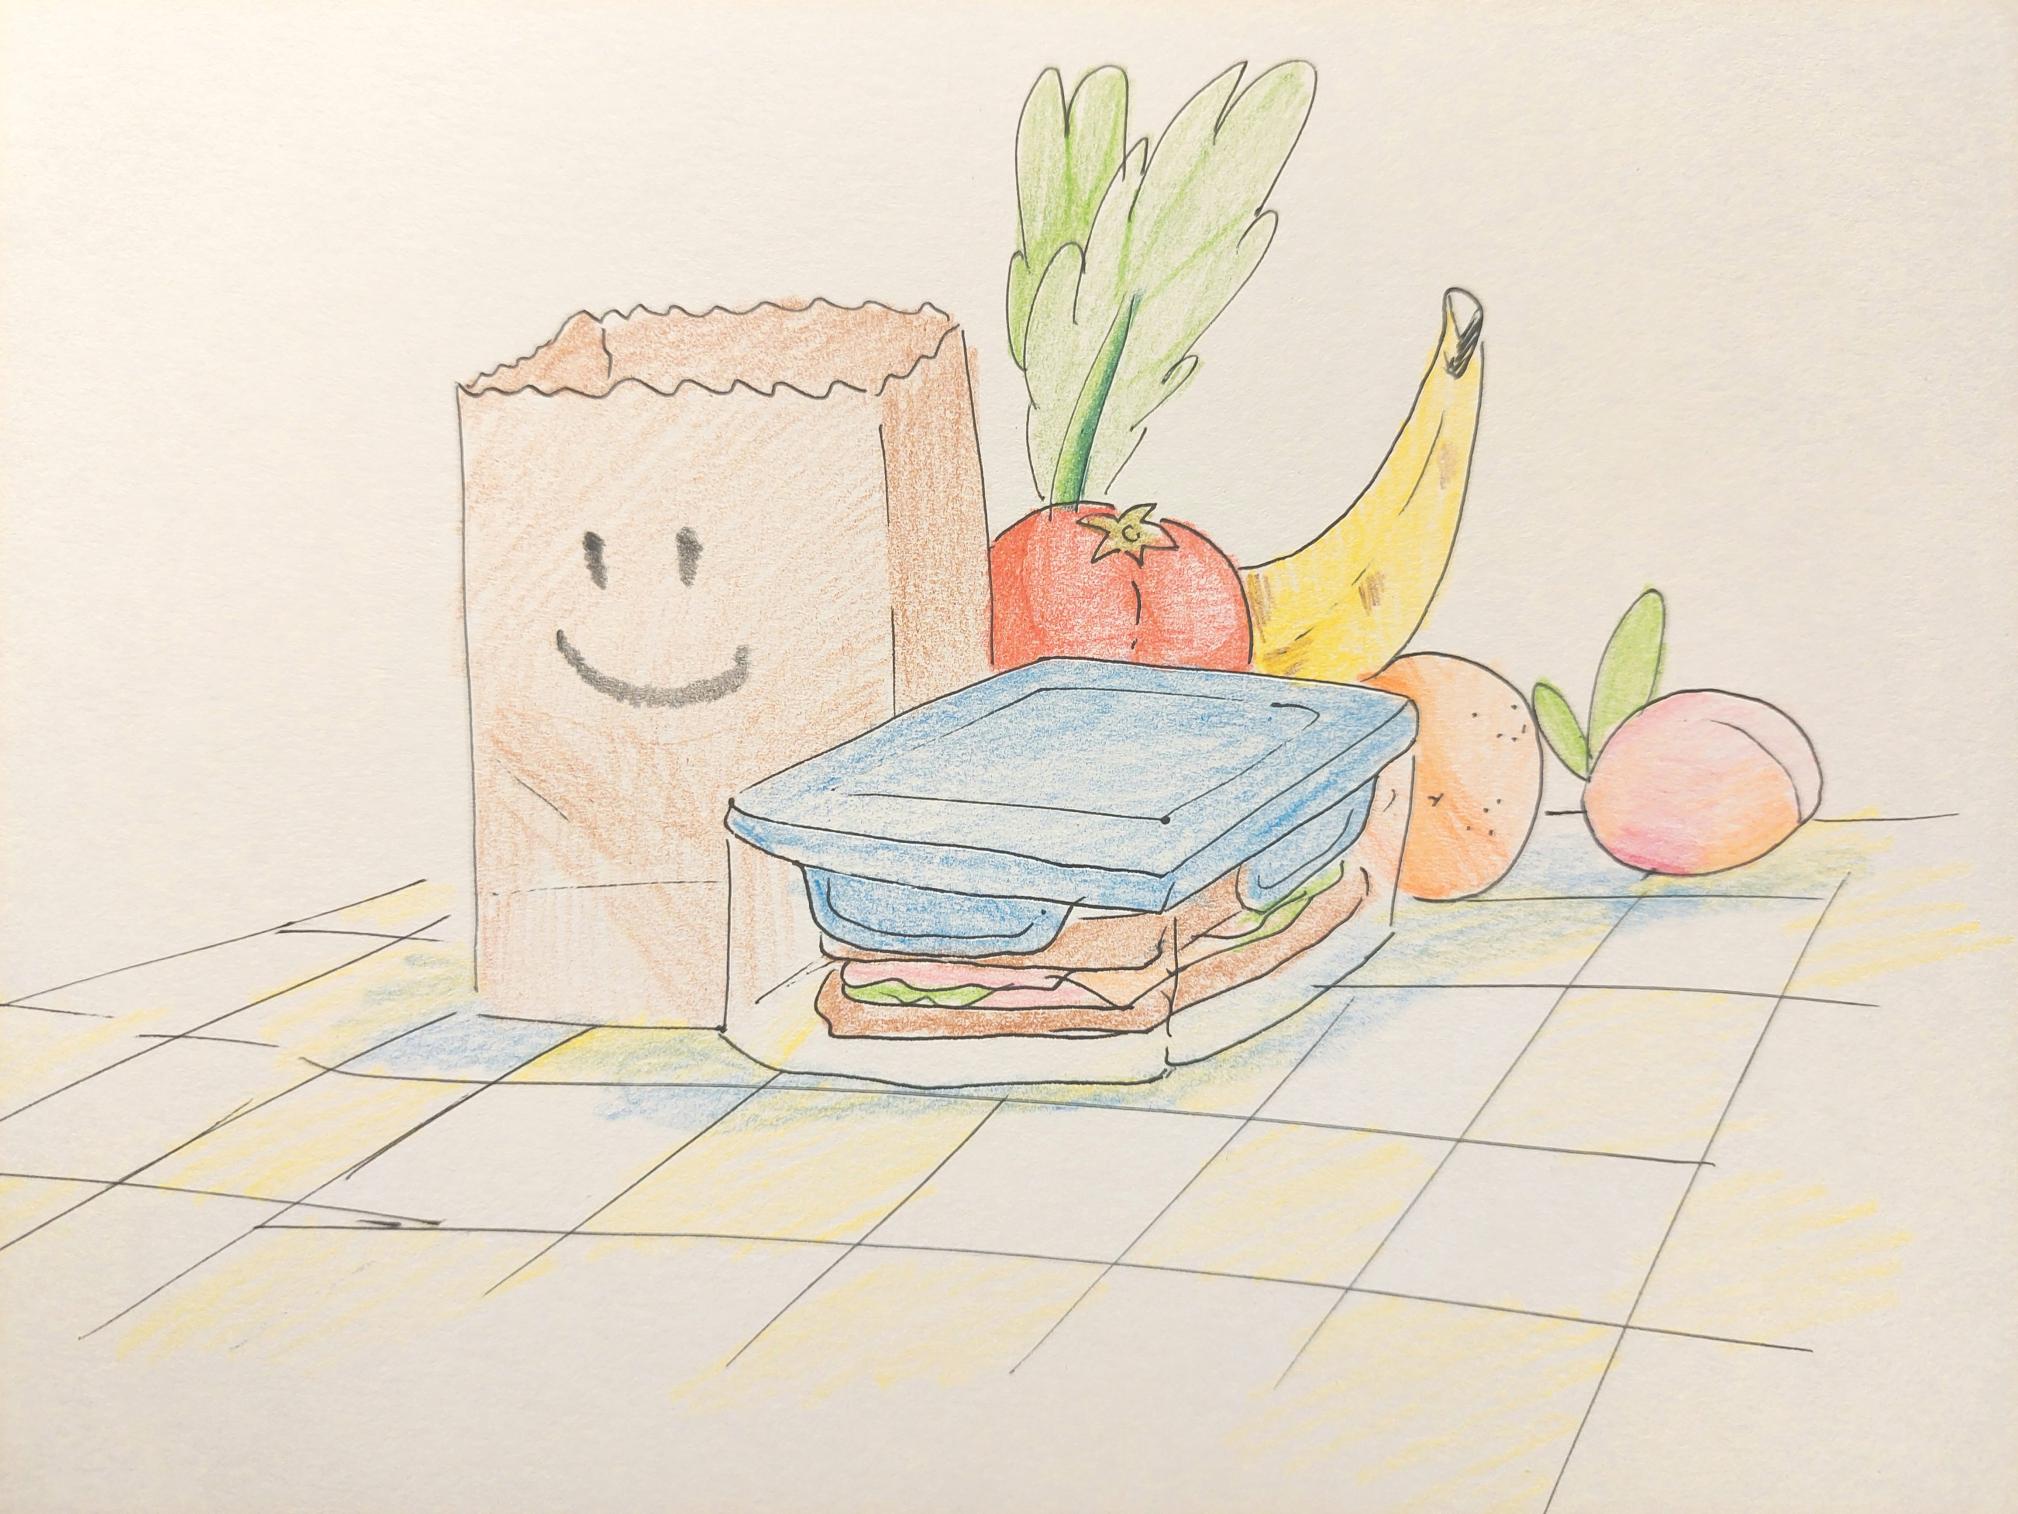 A paper bag, container, and fruits and vegetables. Illustration by Sie Douglas-Fish.